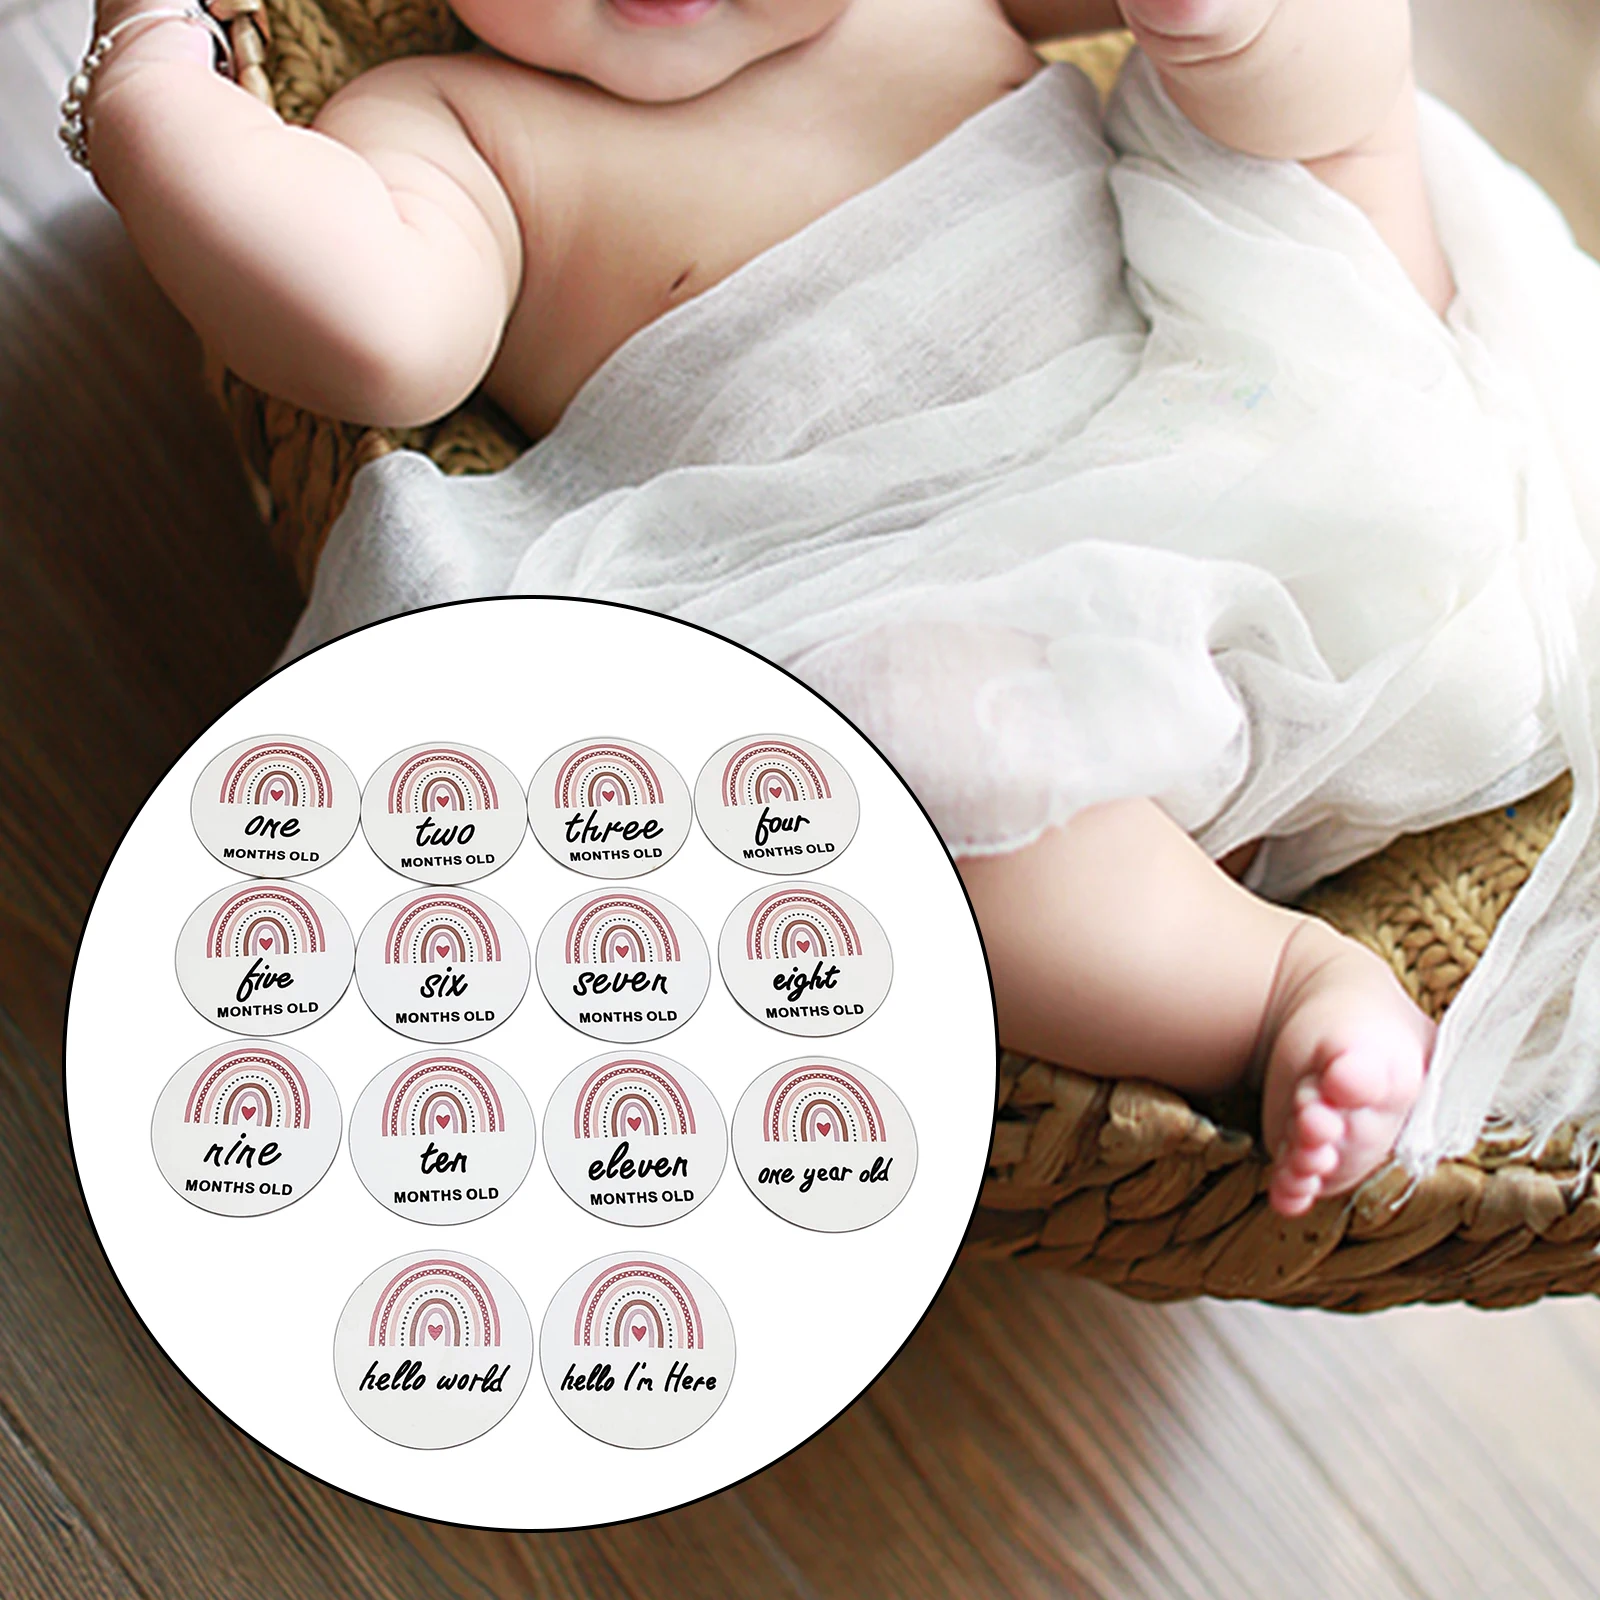 14x Newborn Monthly Growth Recording Cards Photography Prop Commemorative